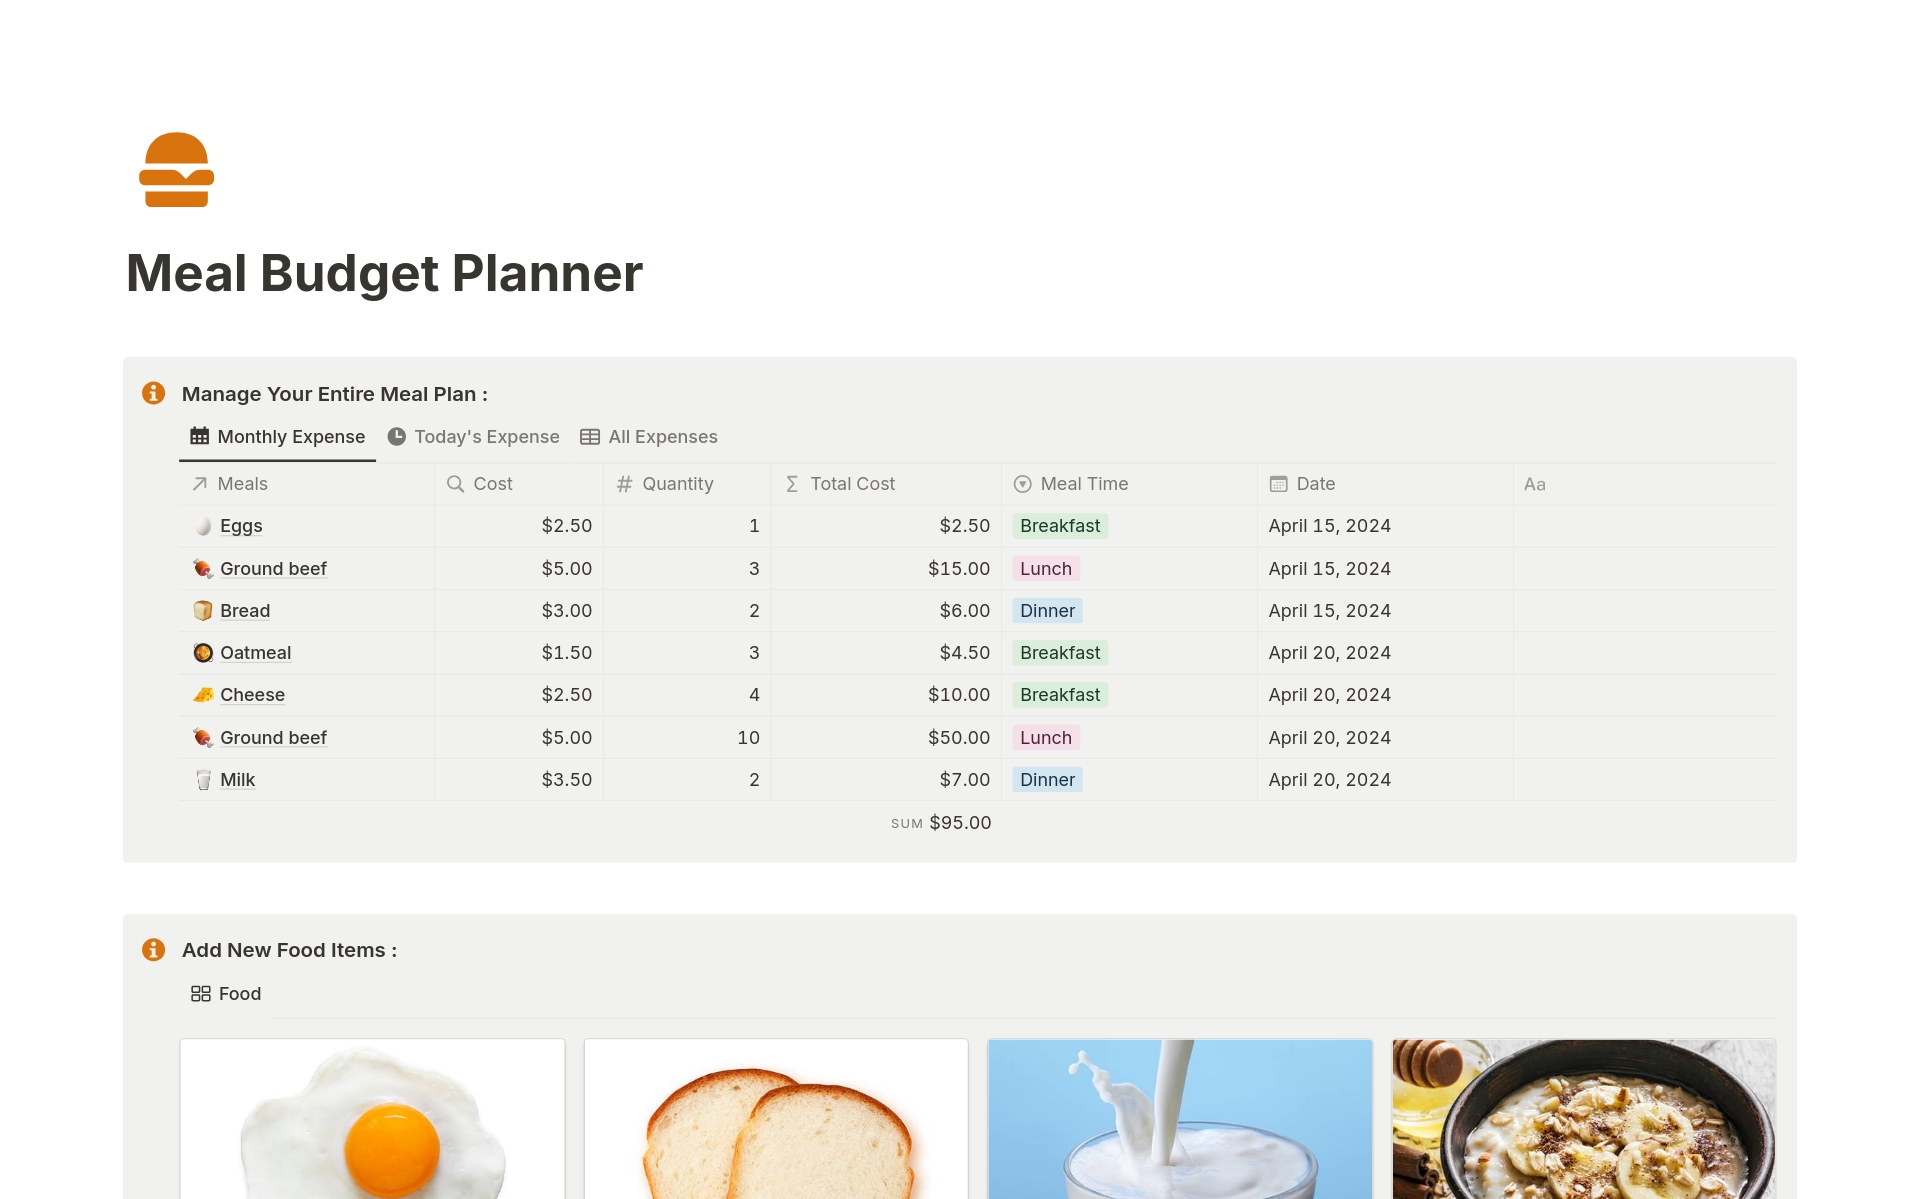 Track your entire monthly meal expense and develop a meal plan with a budget limit for managing your meal spending on a weekly & monthly basis.
Are you a student ? This wil definitely be useful for you.